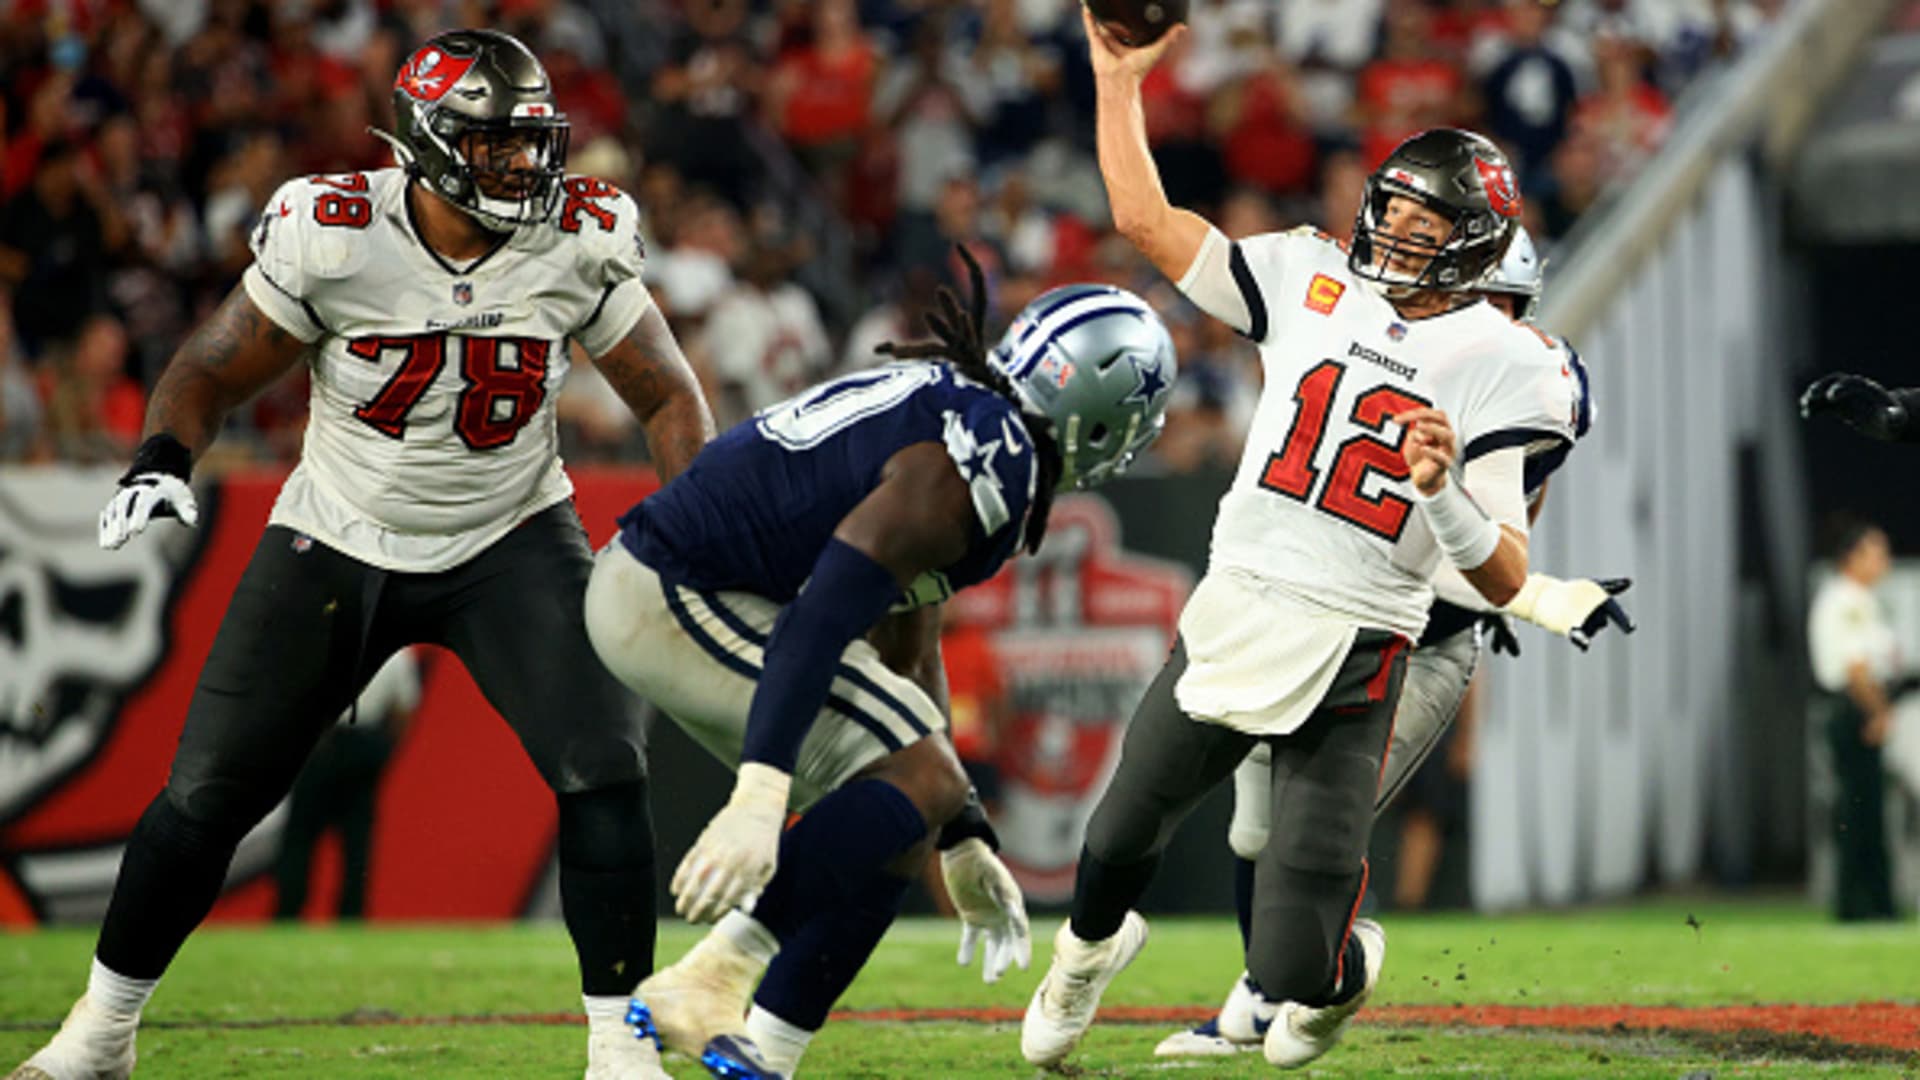 Bucs vs. Cowboys game was the highest viewed NFL opener since 2015